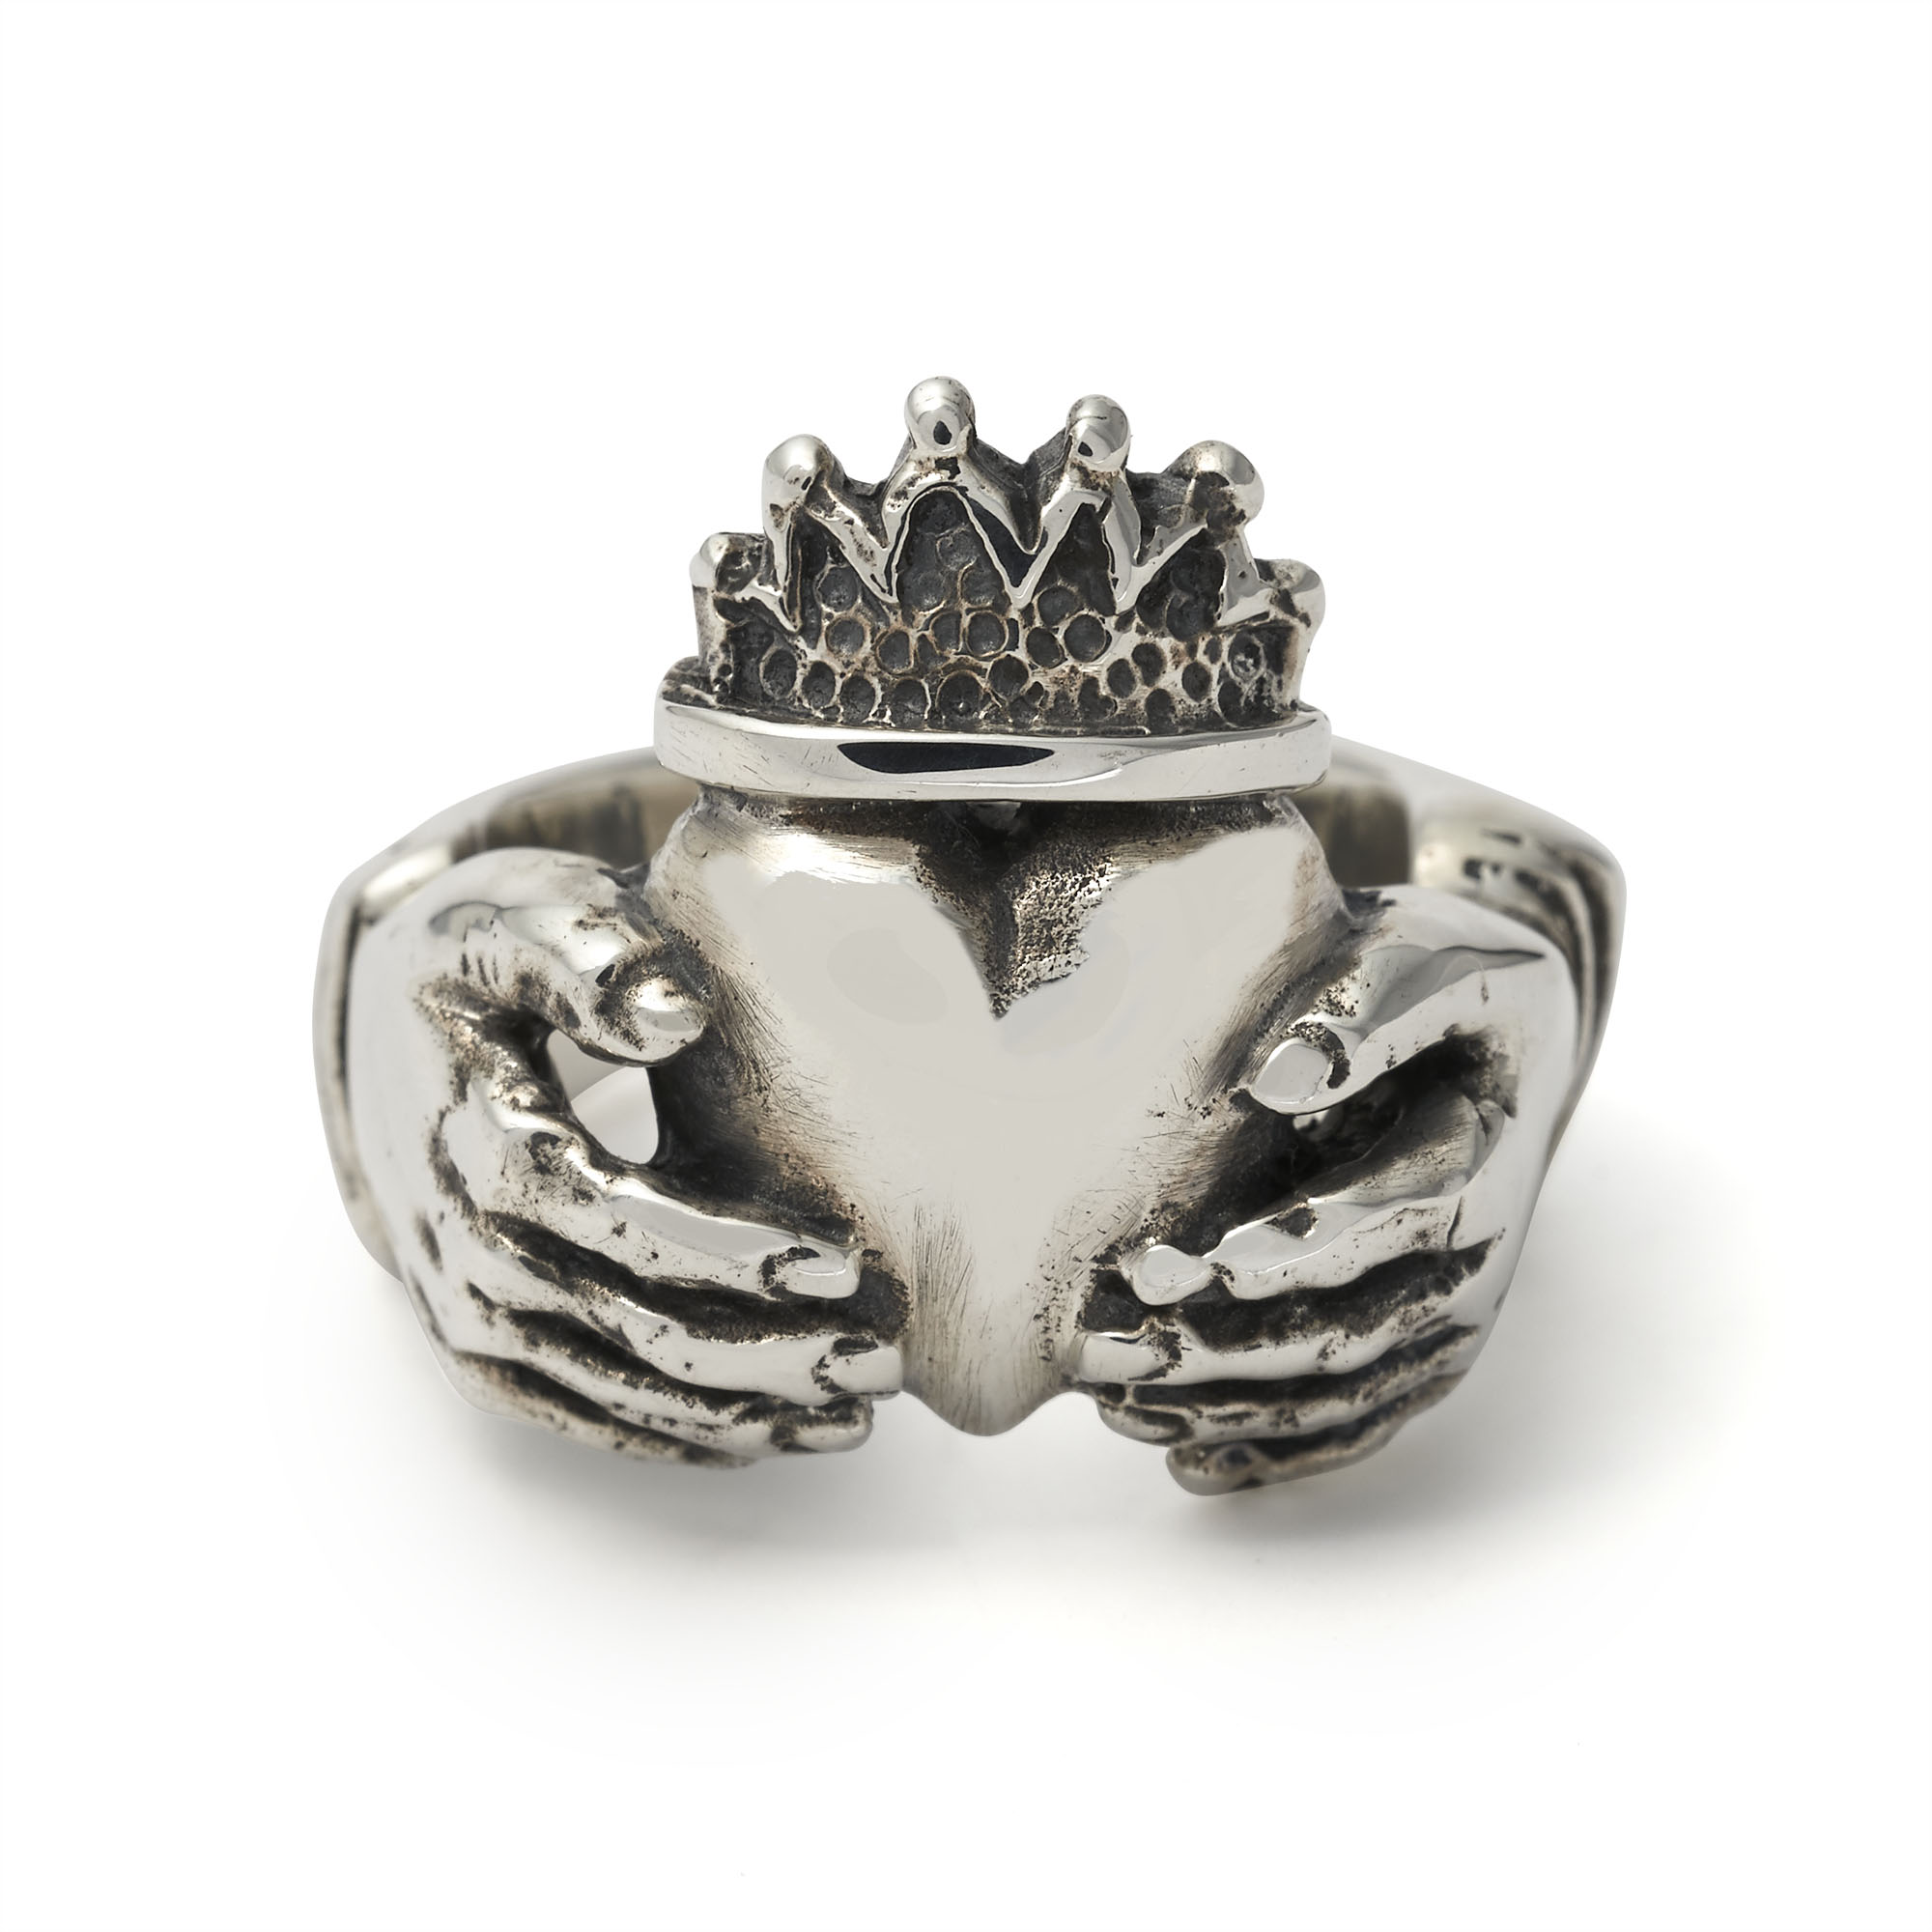 Read more about the article Irish Claddagh Ring – A Symbol of Love, Loyalty and Friendship